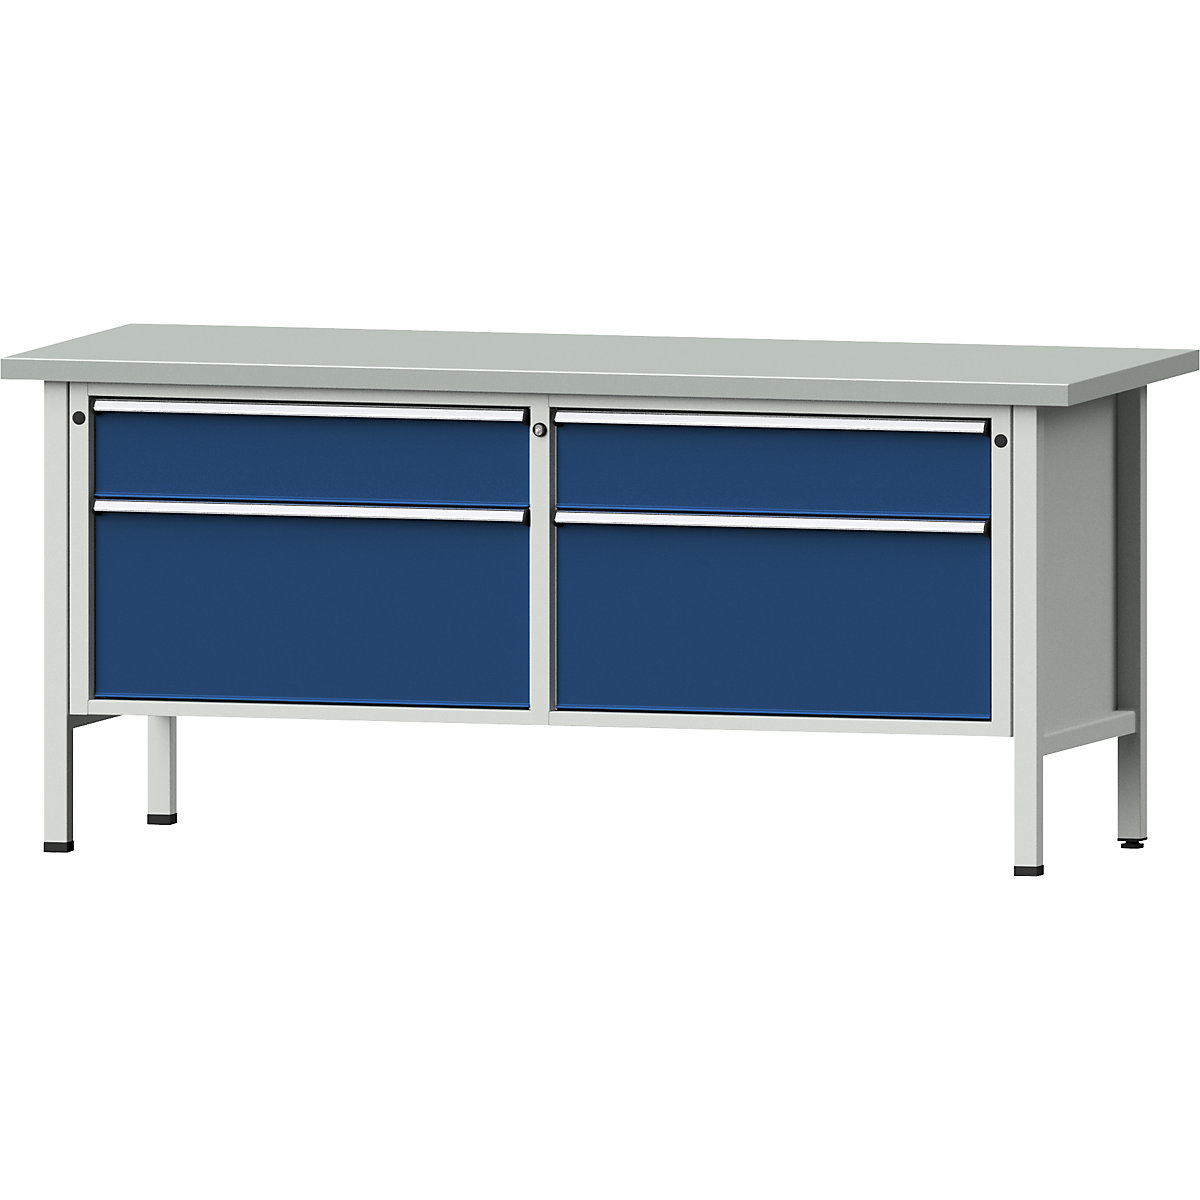 Workbenches 2000 mm wide, frame construction – ANKE, 4 drawers, sheet steel covered worktop, height 890 mm-9